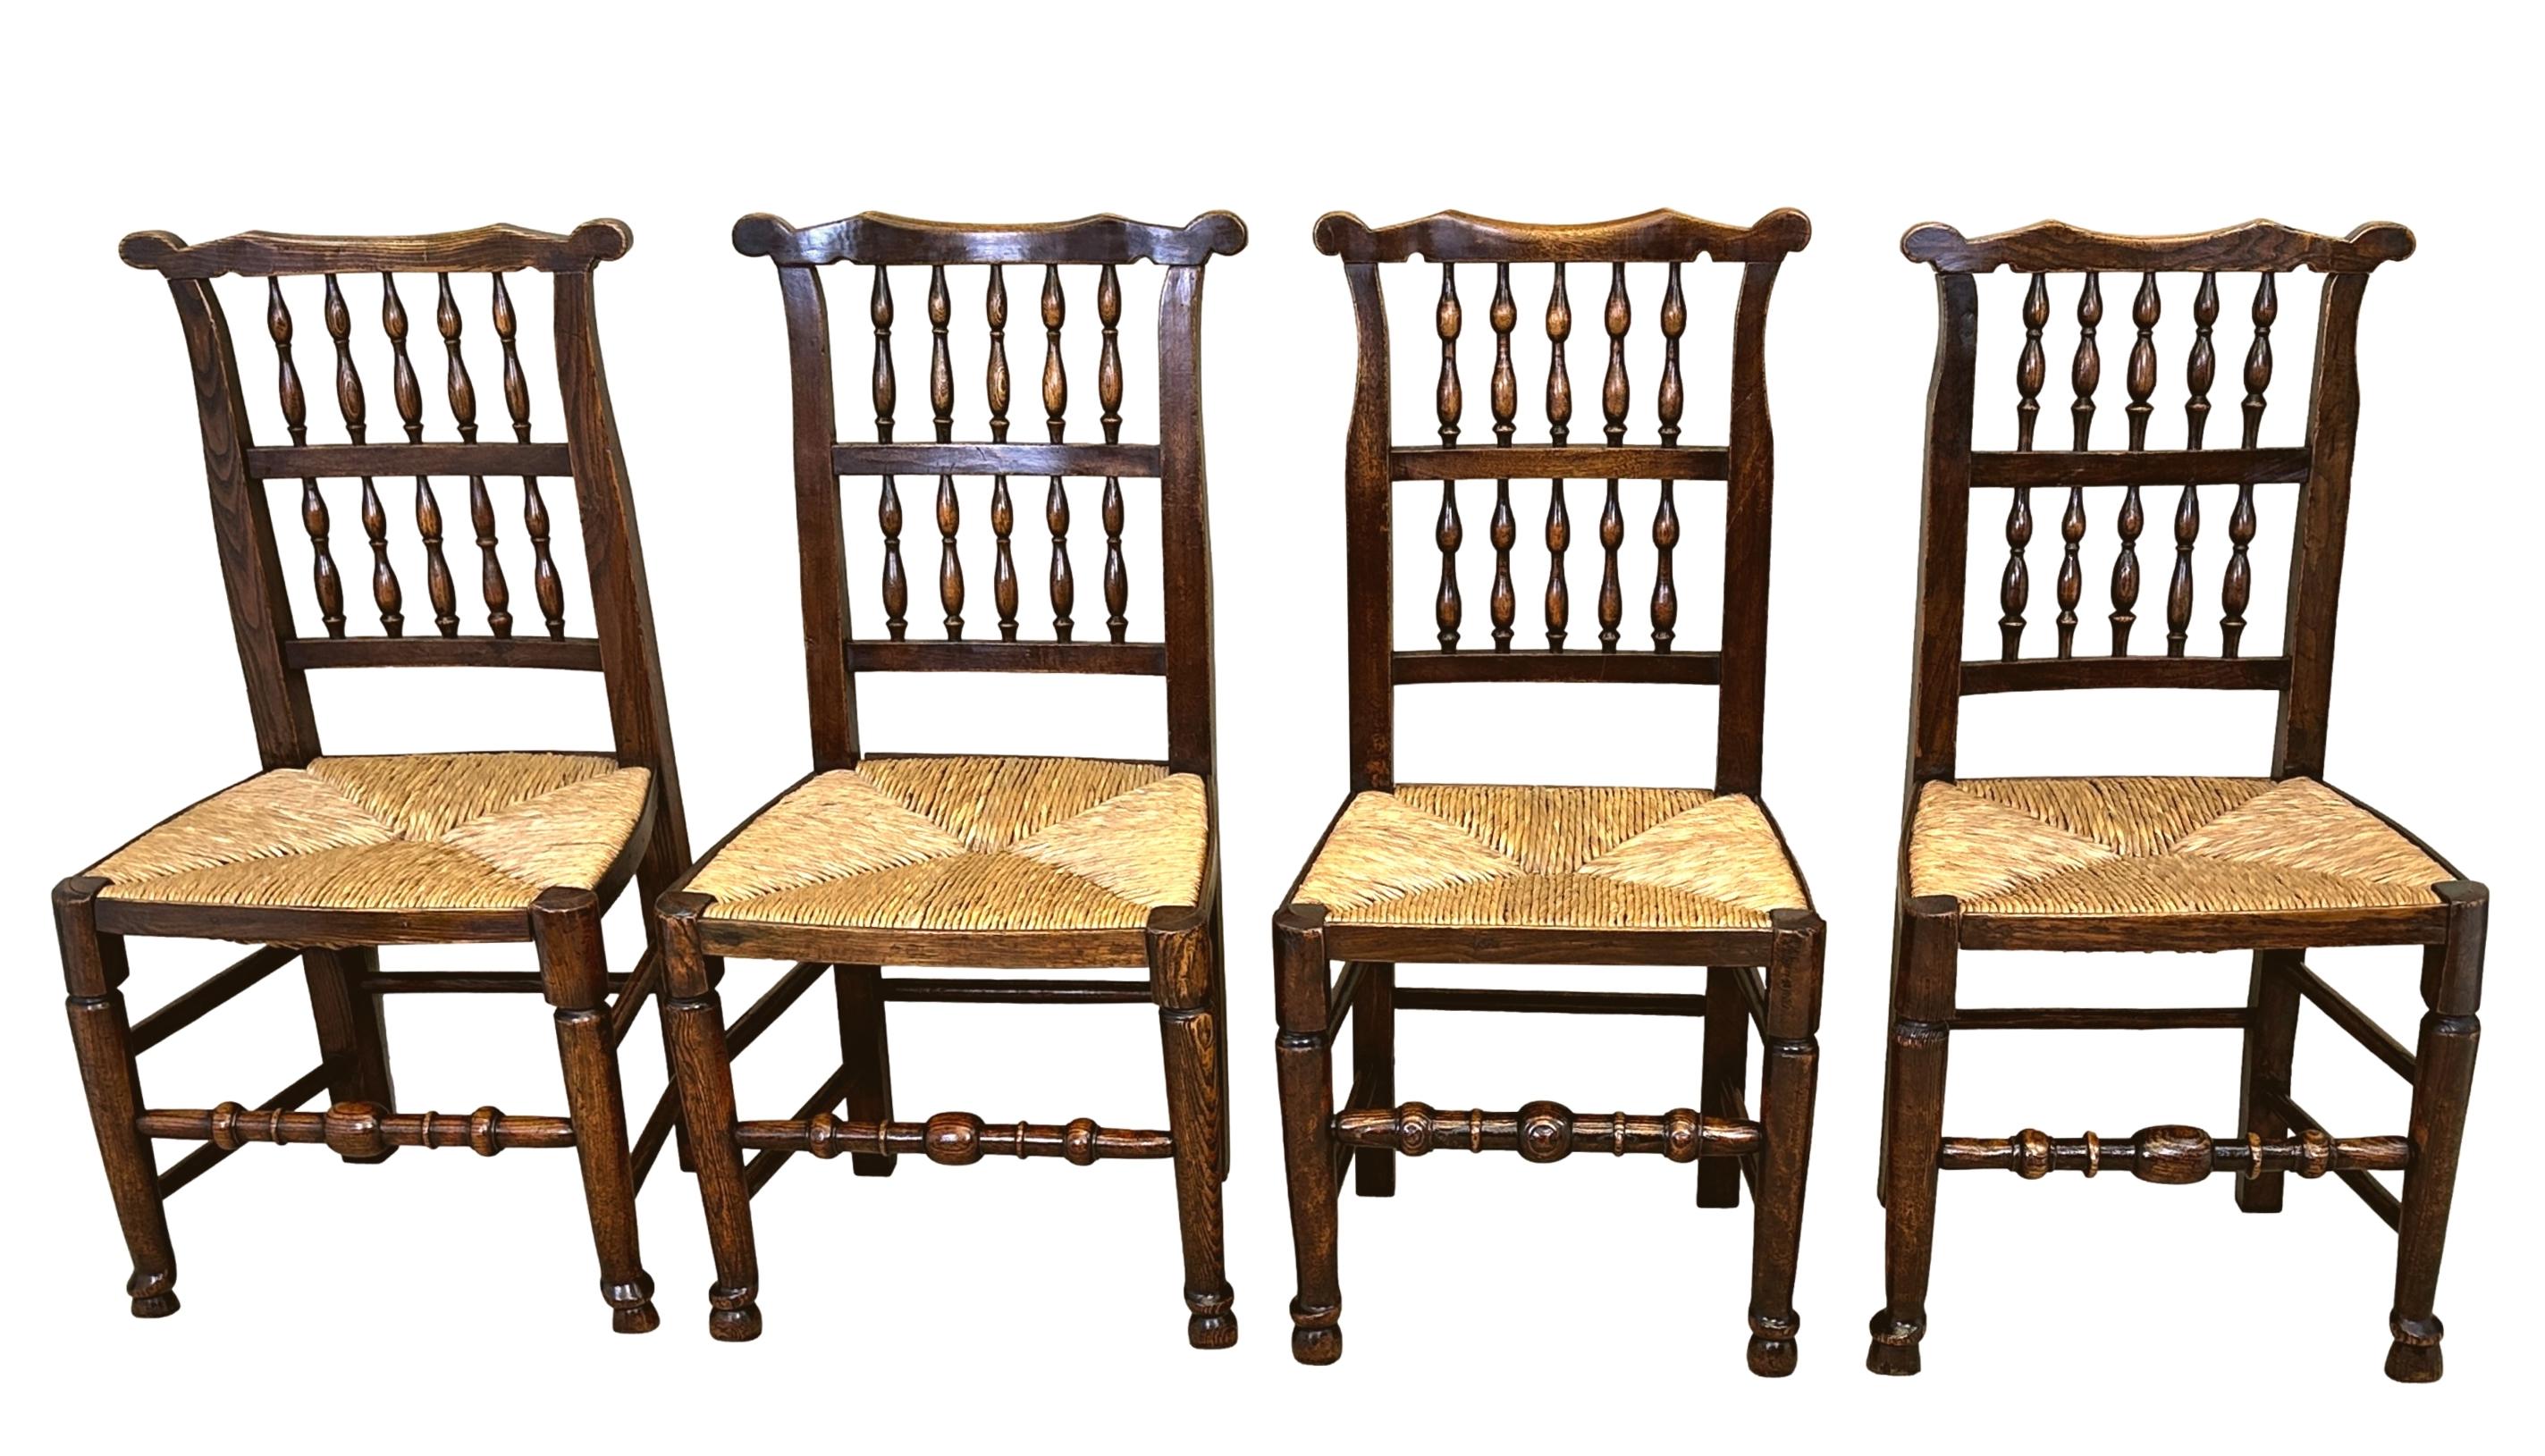 An Extremely Attractive Early 19th Century, Georgian, Matched Set Of 10, Ash And Elm, Farmhouse Kitchen Dining Chairs Having Rare Ears To Shaped Top Rail Of Double Row Spindlebacks, Over Rushed Seats Raised On Elegant Turned Legs And